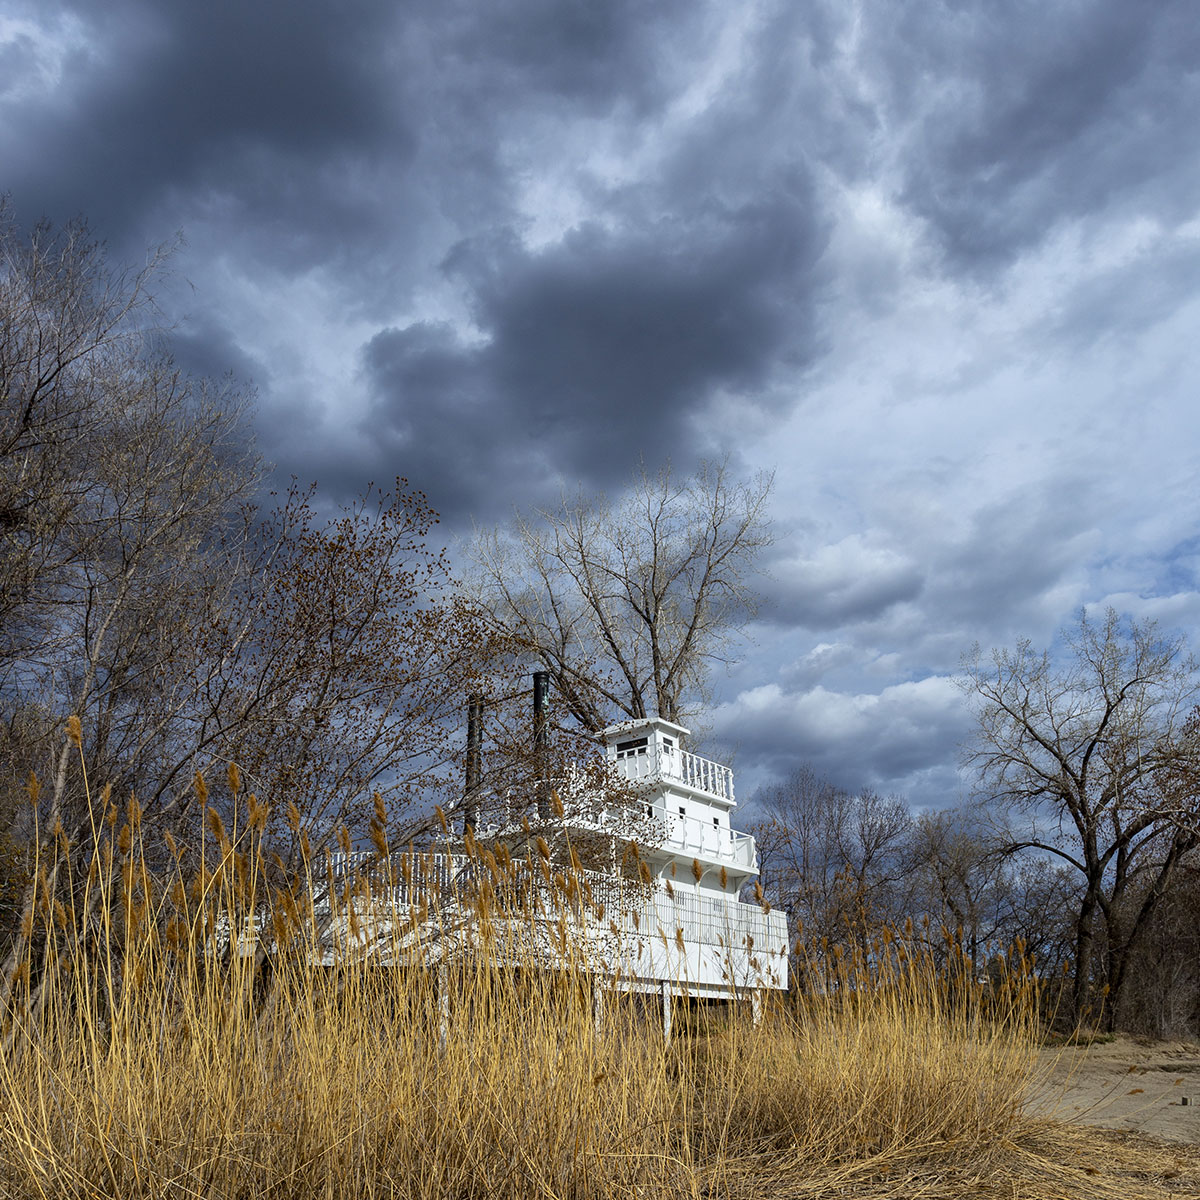 Golden reeds and cloudy skies frame a static display of a steamboat at Steamboat Park Bismarck, North Dakota on the banks of the Missouri River.